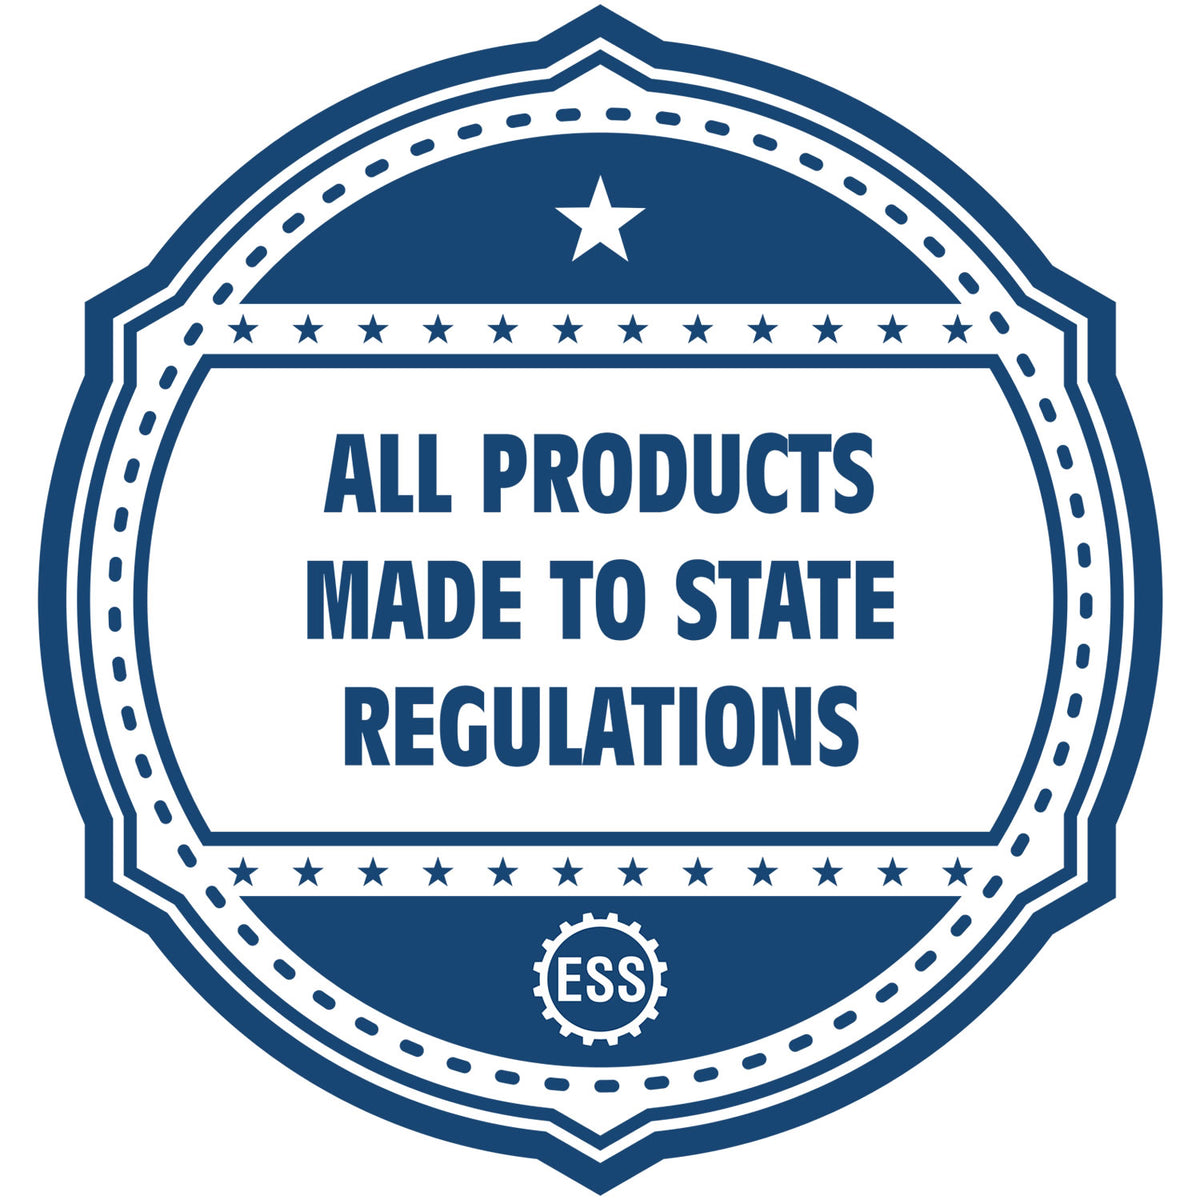 A blue icon or badge for the Gift Wyoming Engineer Seal showing that this product is made in compliance with state regulations.